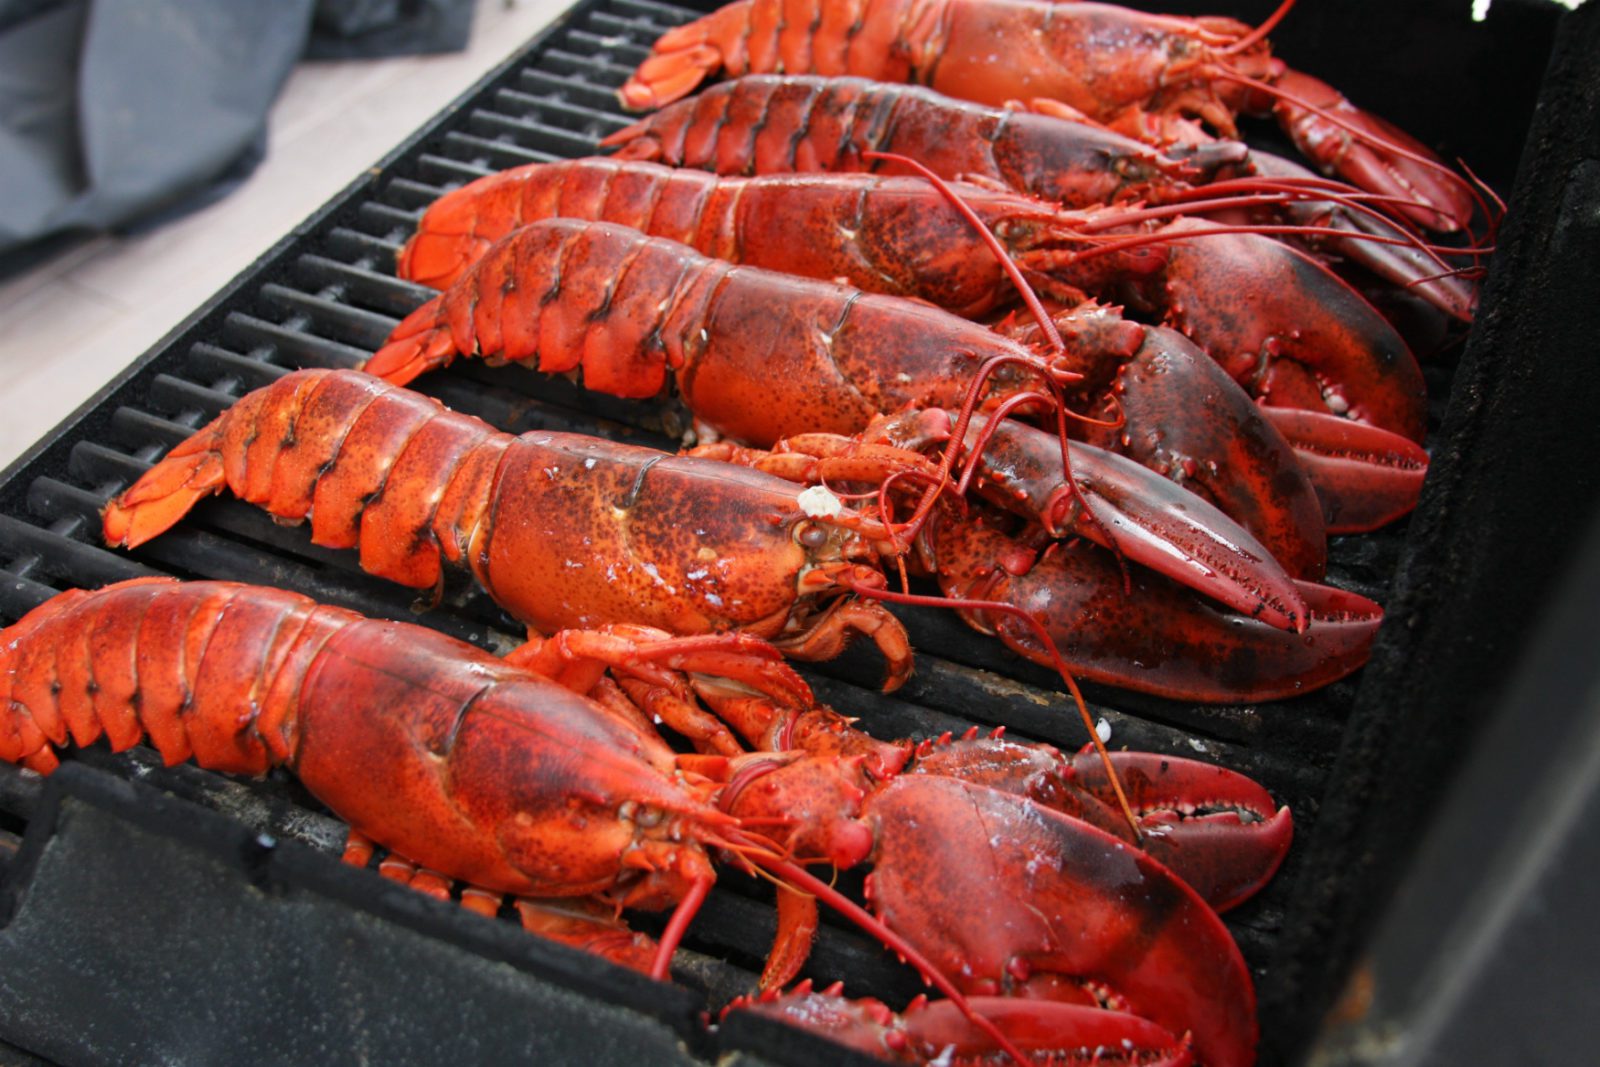 How To Eat Lobster A Guide To Ordering In A Restaurant Scotsman Food And Drink